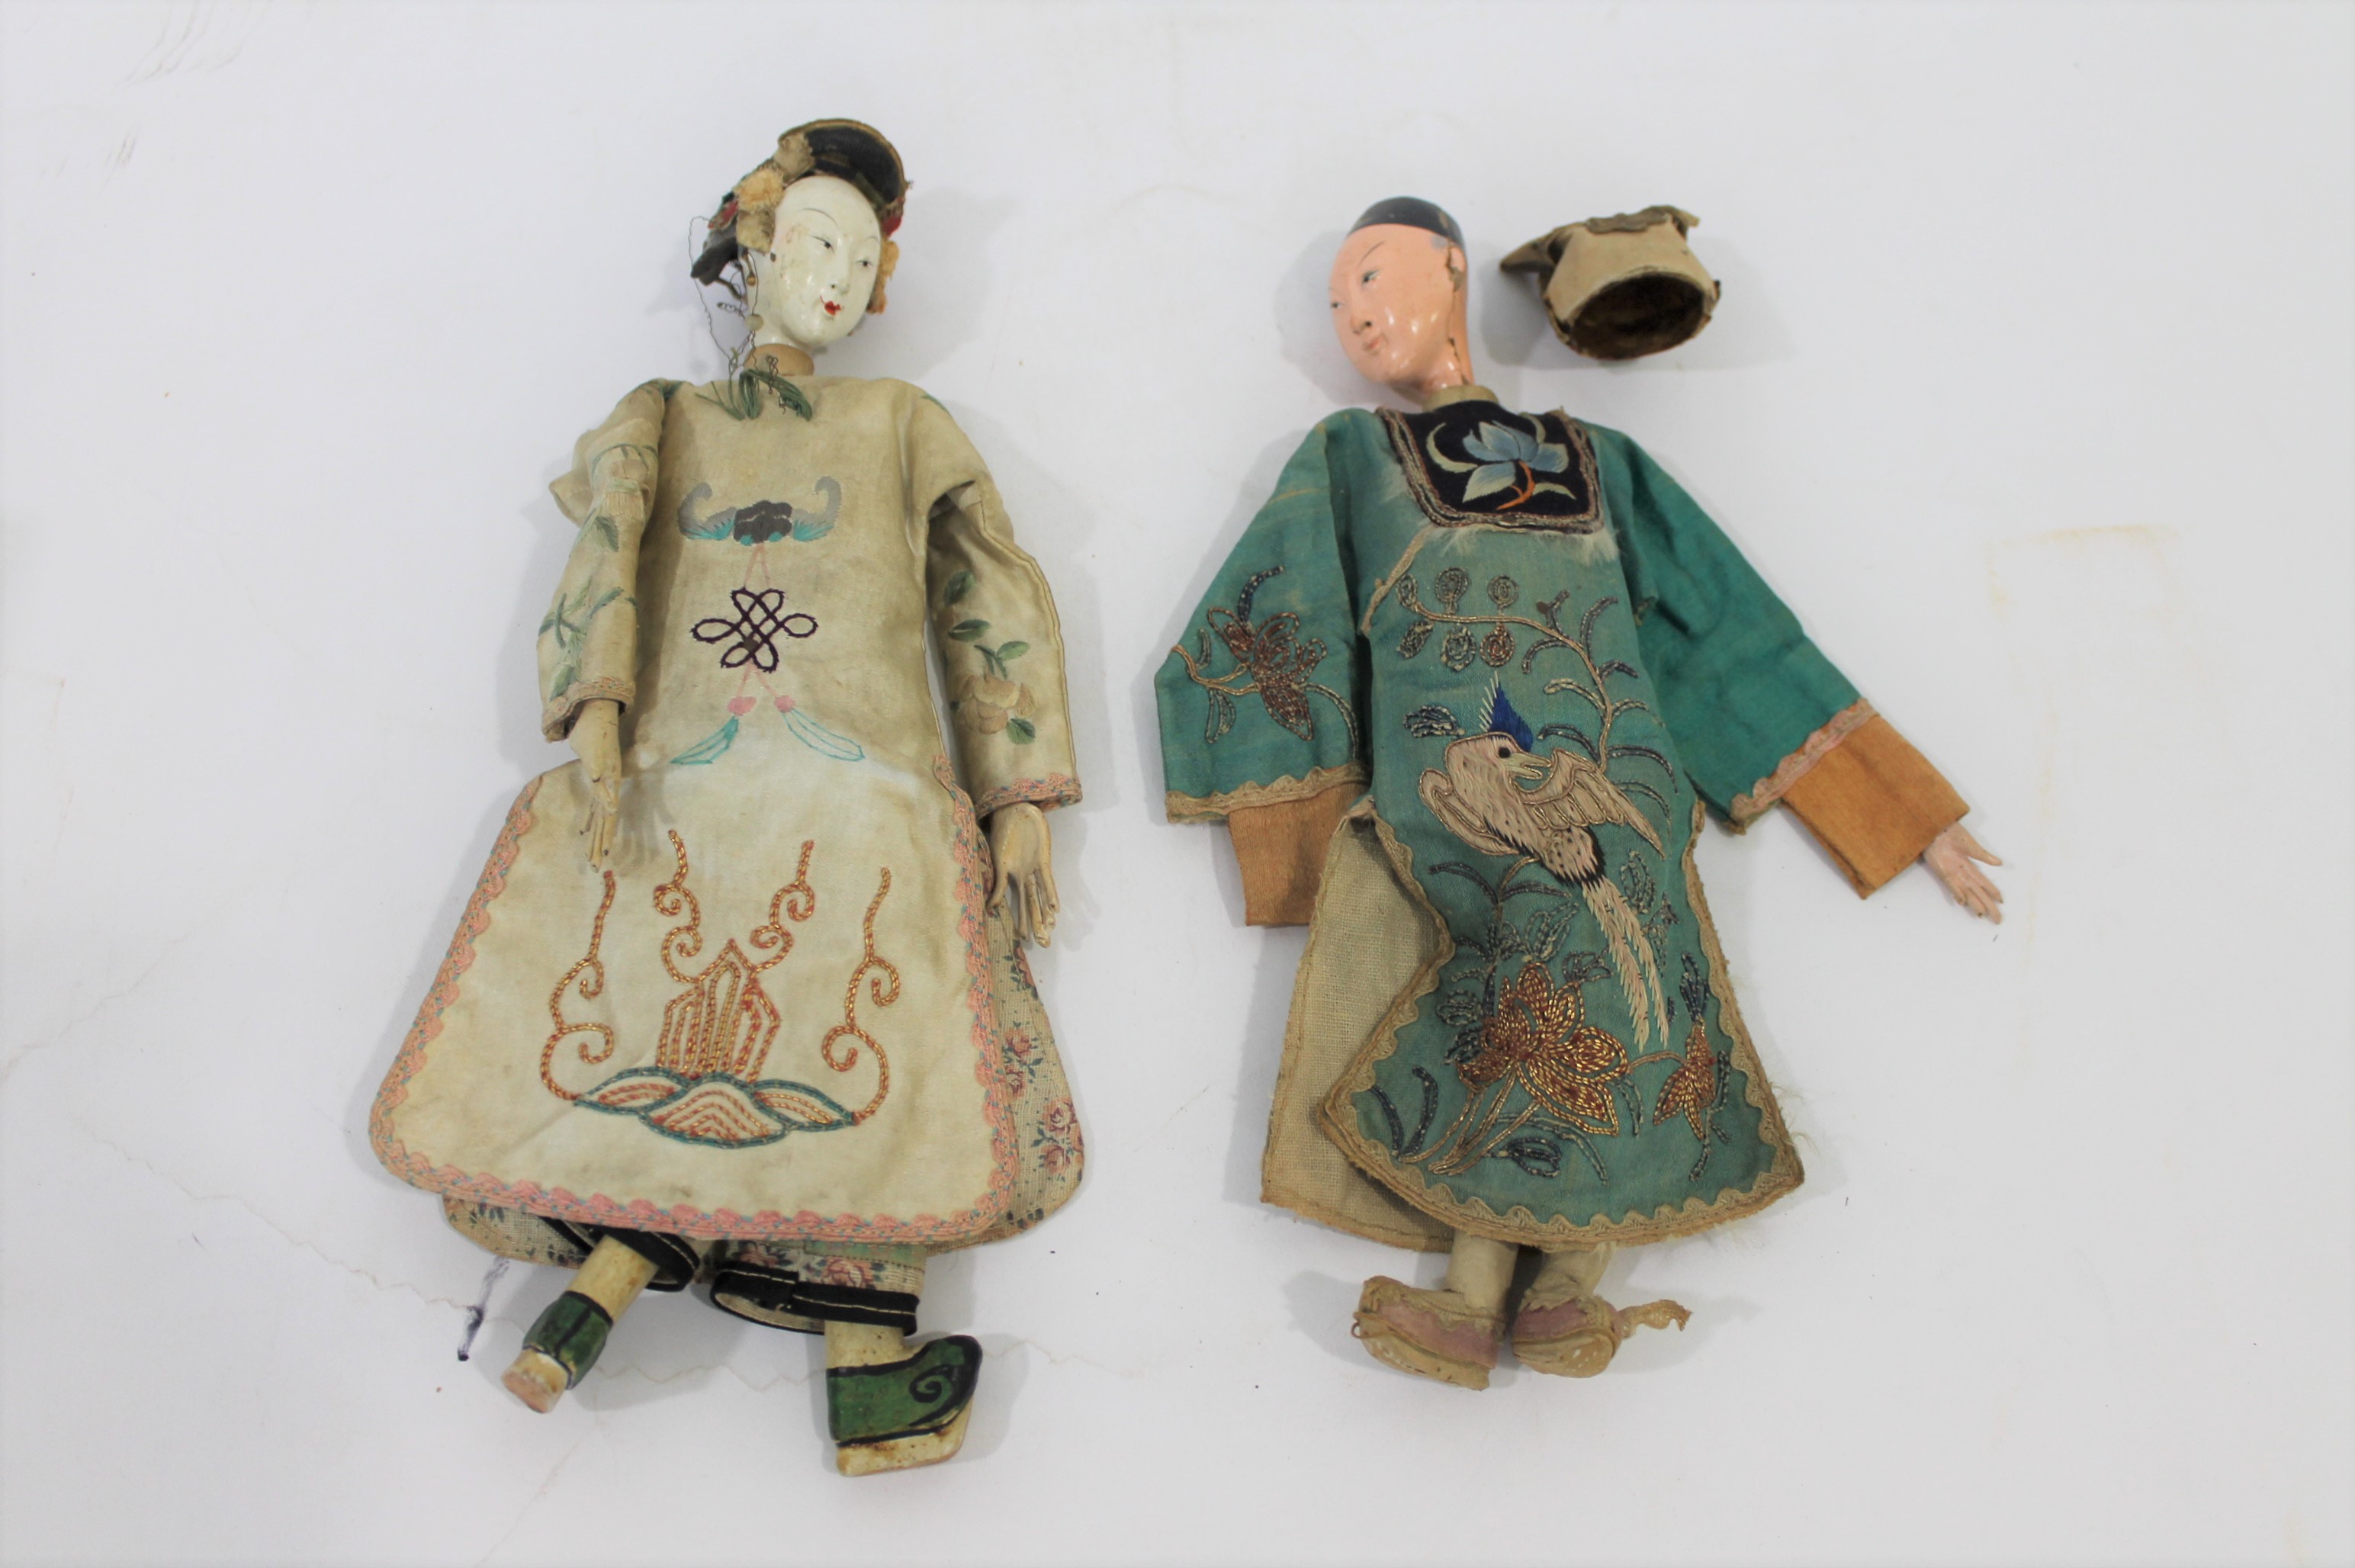 Antique Chinese Dolls And Clothing 2 Chinese Wooden Dolls Probably Late 19thc Both Dolls With Emb